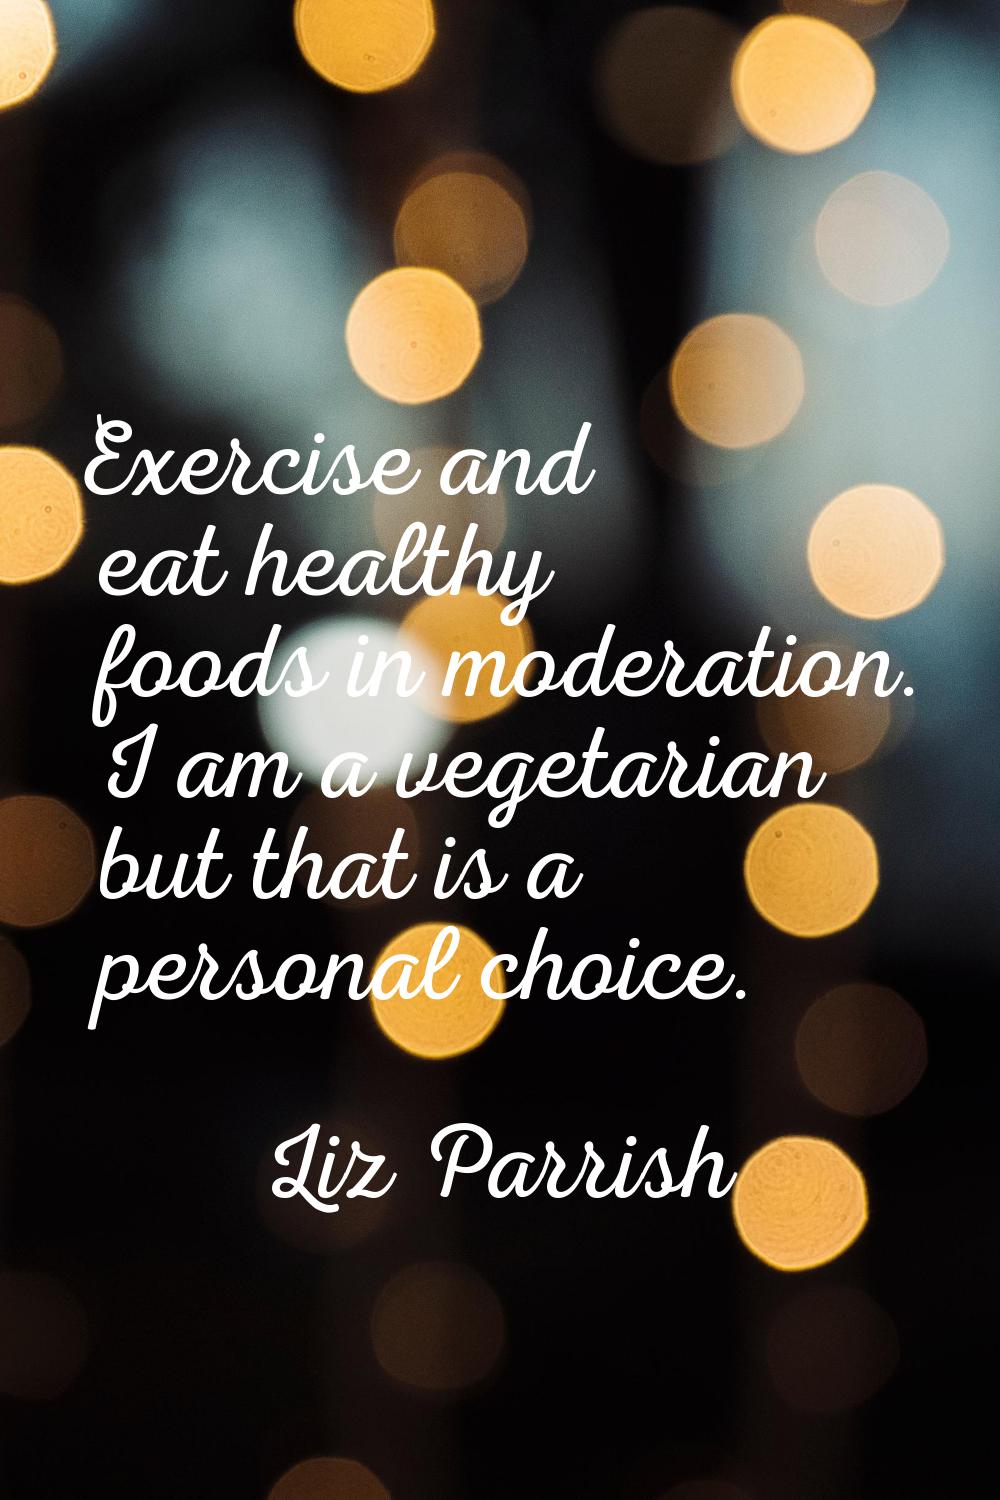 Exercise and eat healthy foods in moderation. I am a vegetarian but that is a personal choice.